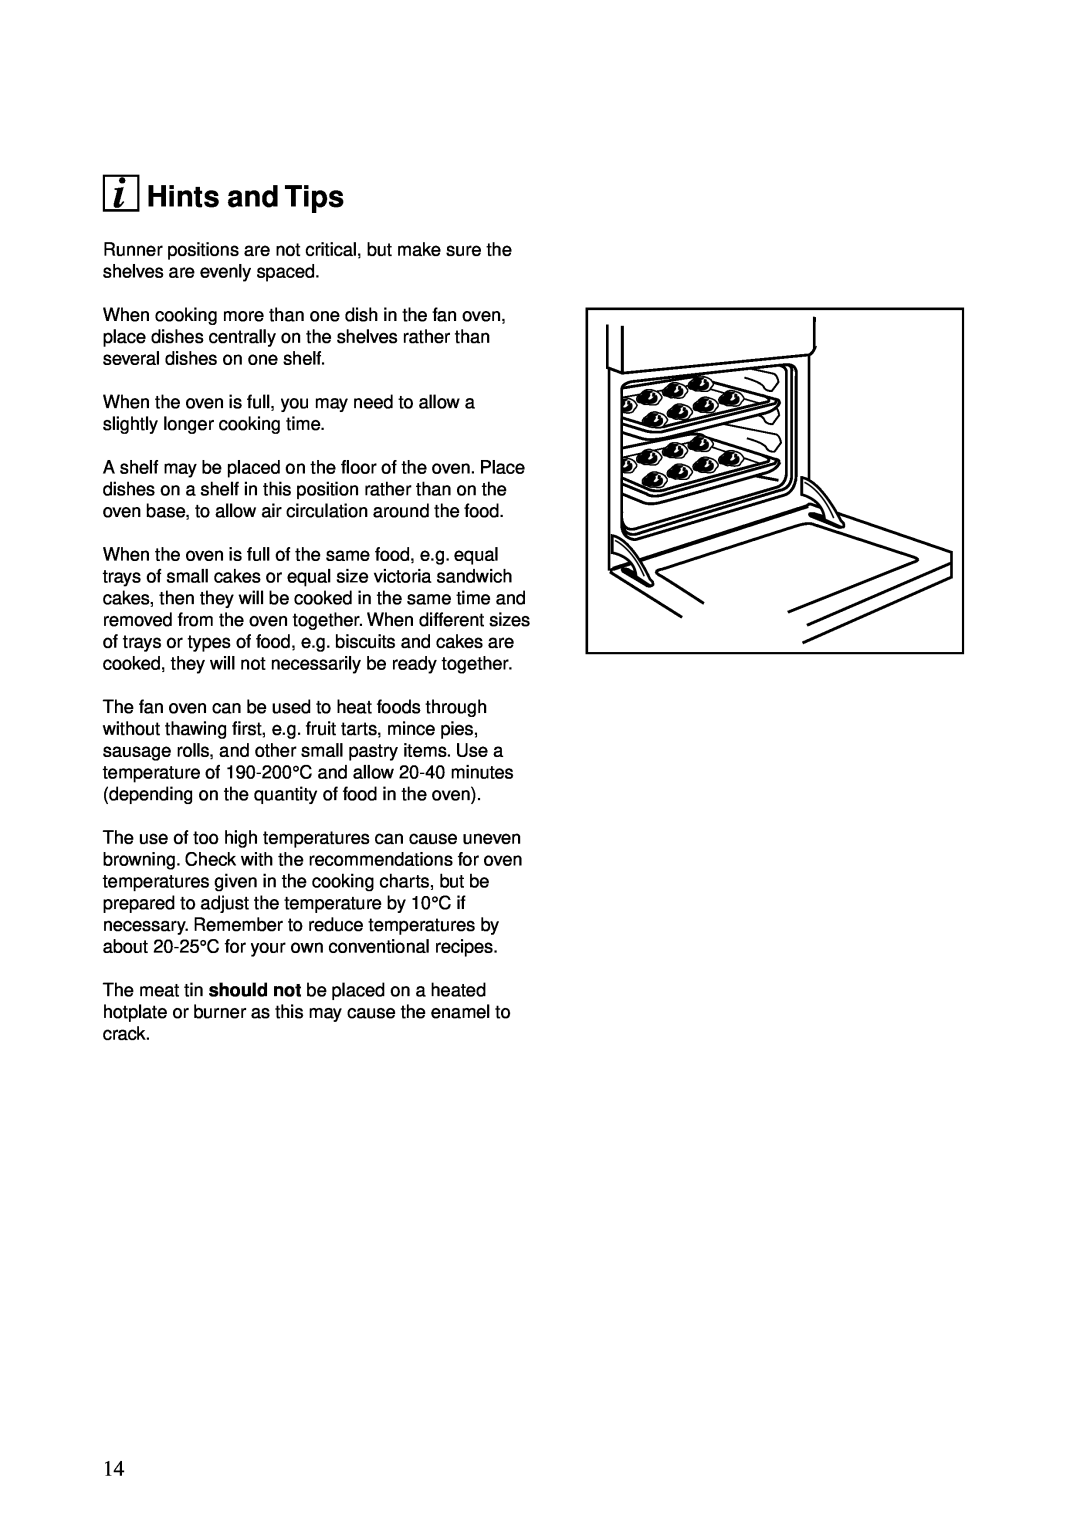 Zanussi ZBS 772 manual Hints and Tips, Runner positions are not critical, but make sure the shelves are evenly spaced 